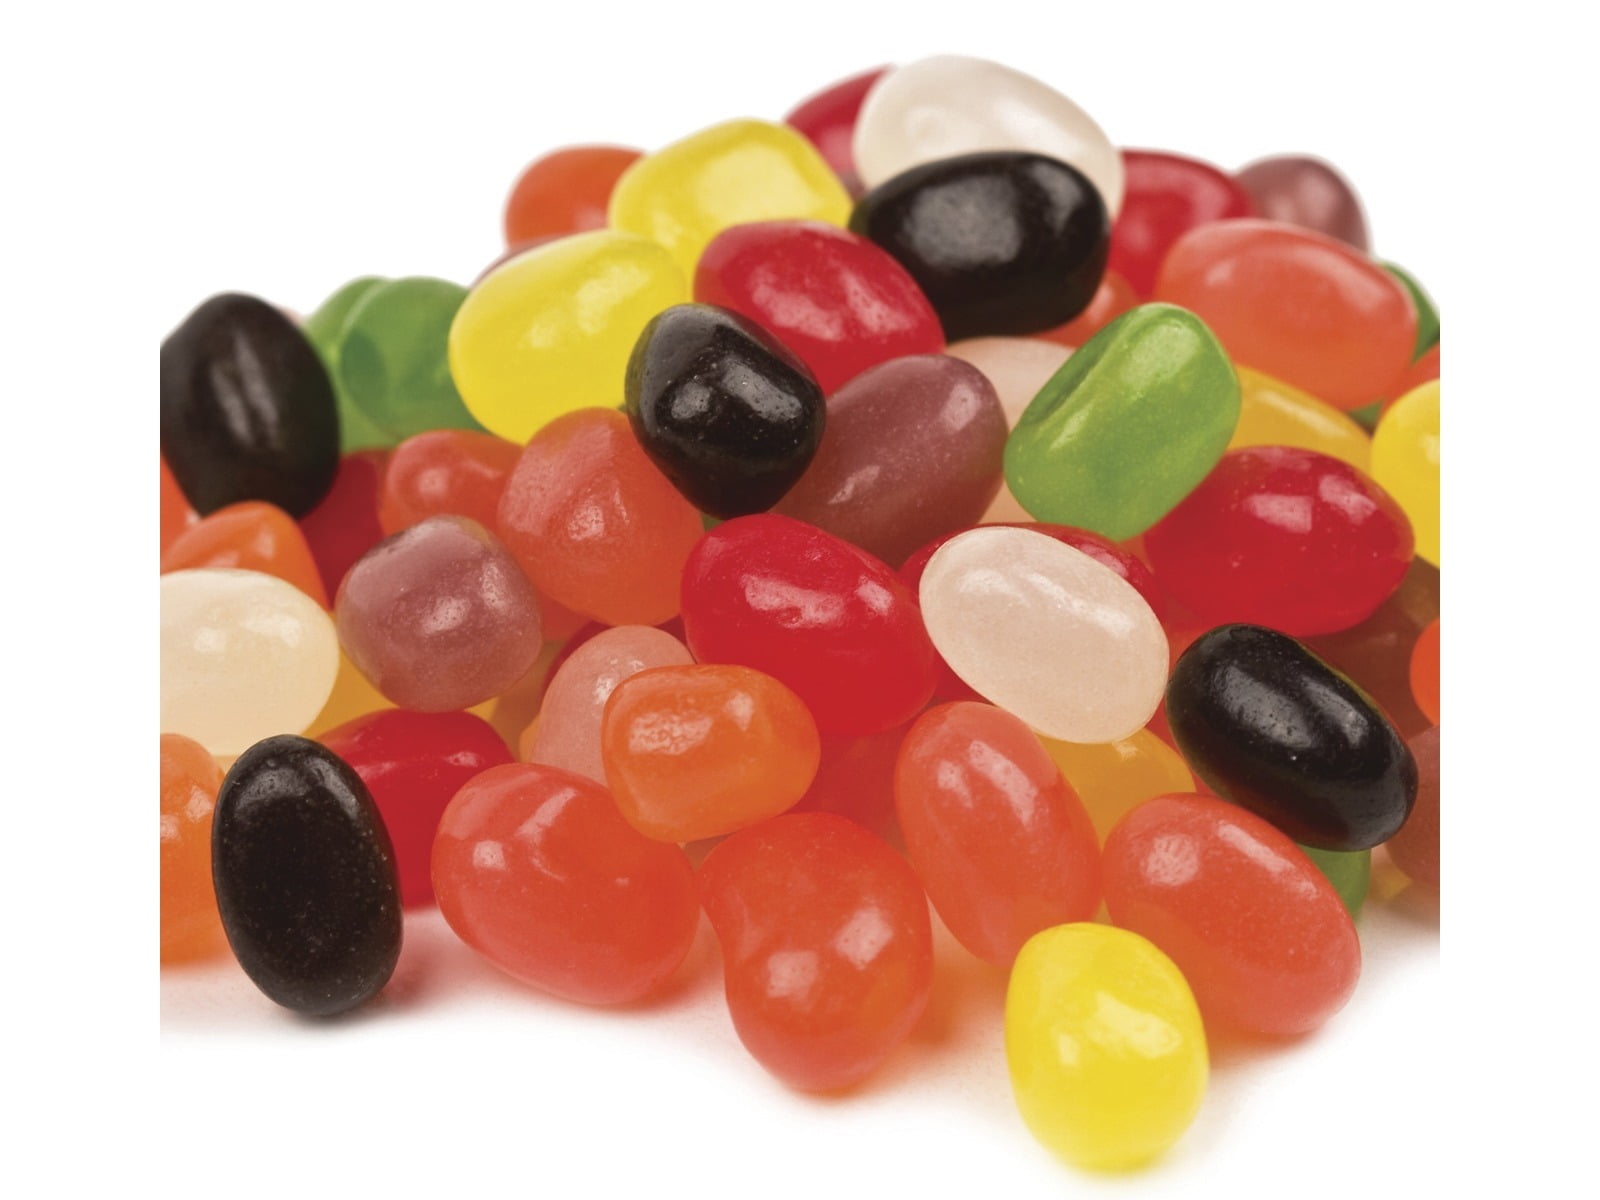 Buy Just Born Jelly Beans 2 pounds Assorted Fruit flavored Jelly Beans at.....